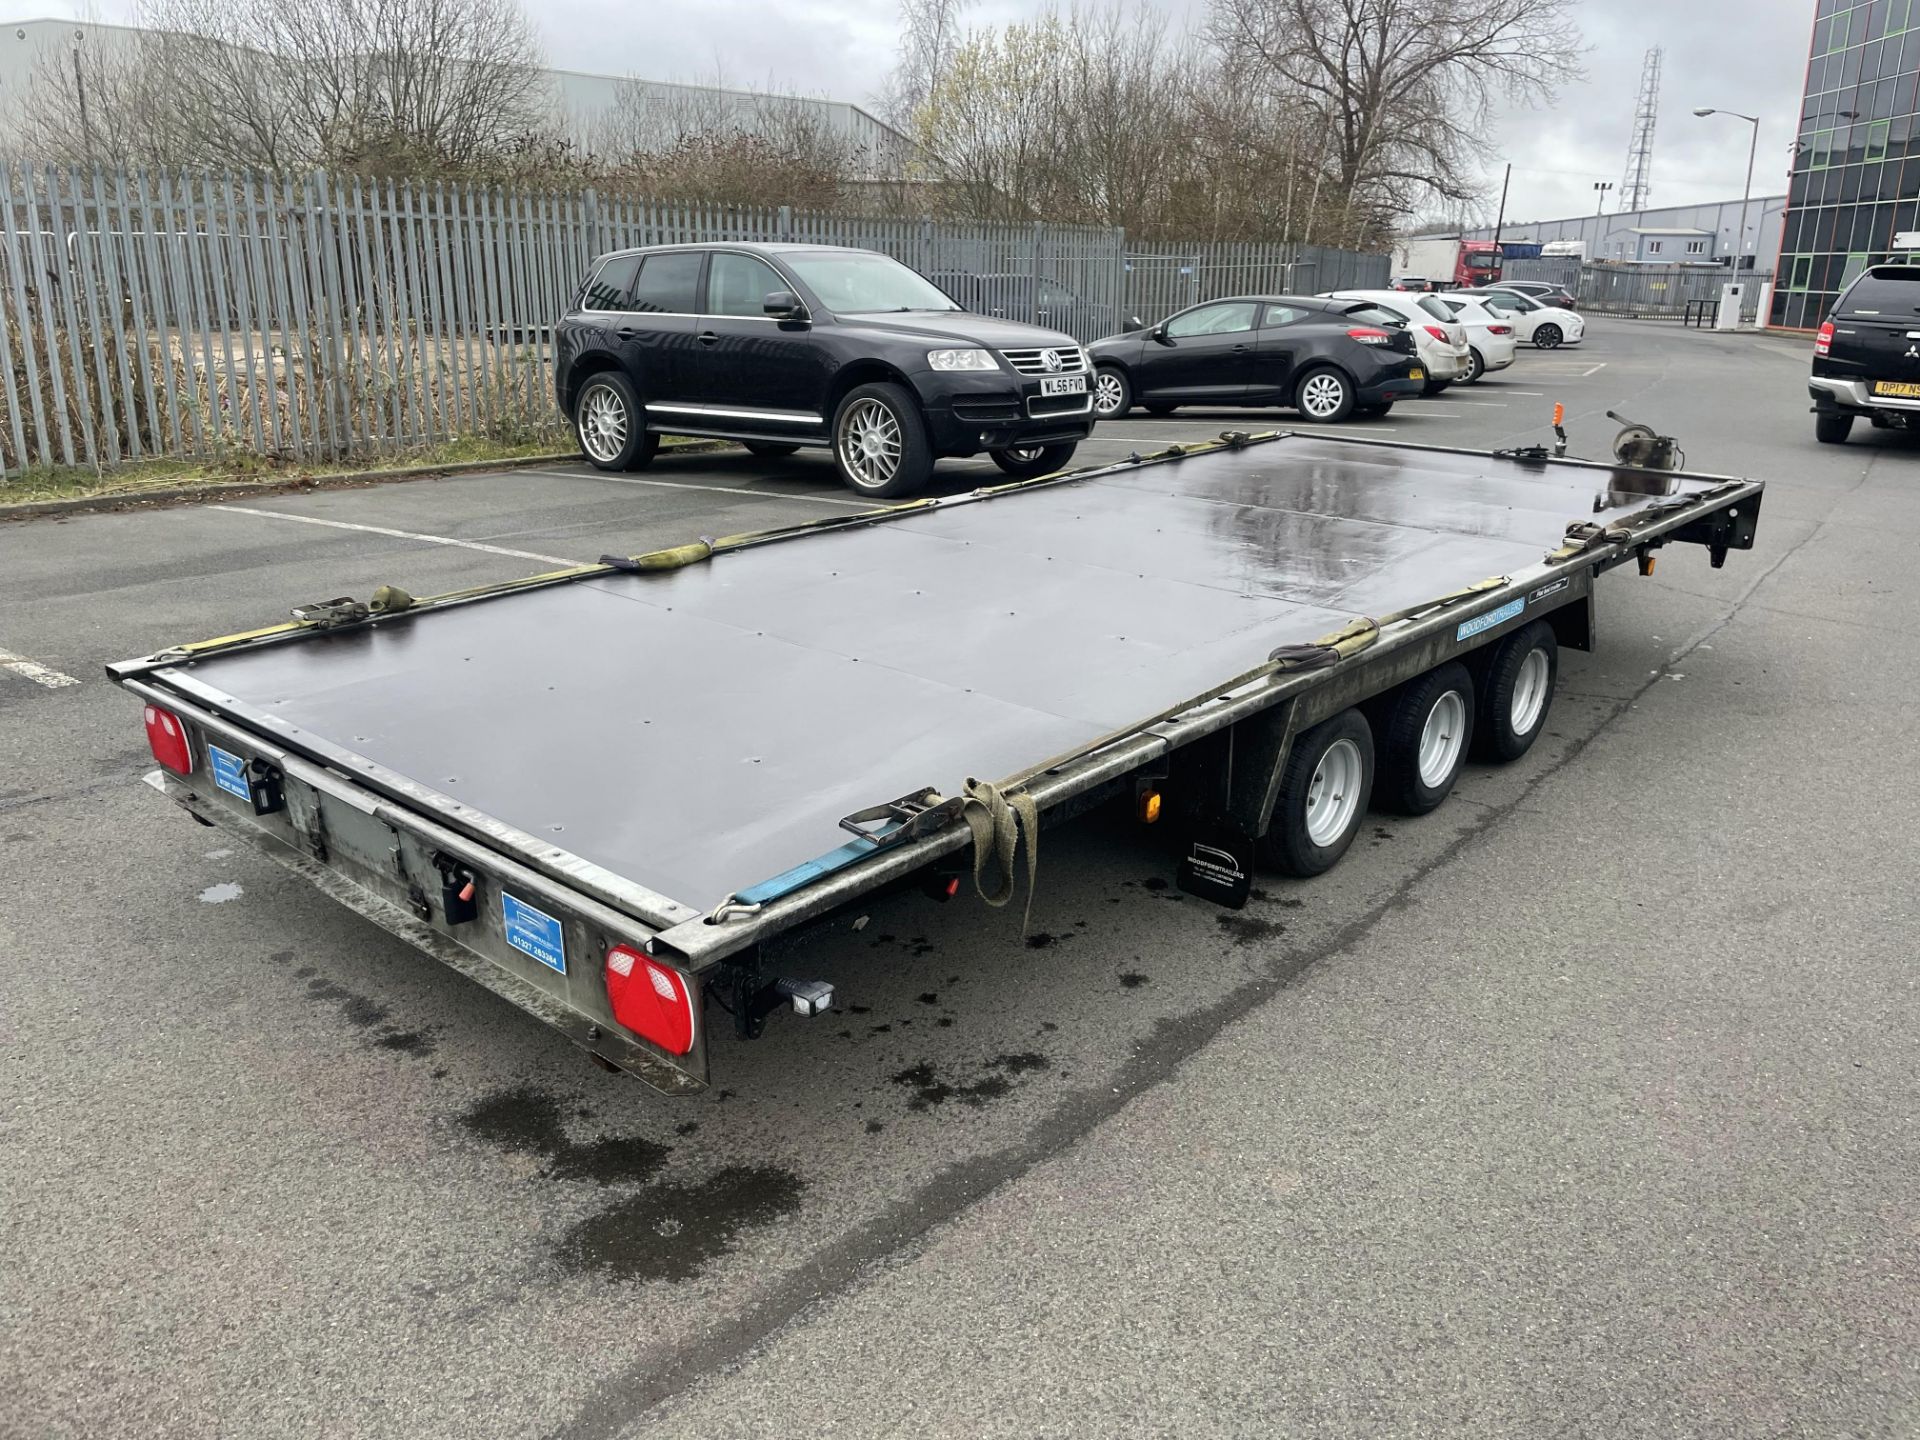 January 2021 Woodford 18 Ft Tri-Axle Hydraulic Tilt Flatbed Trailer c/w Ramps and Manual winch - Image 5 of 10